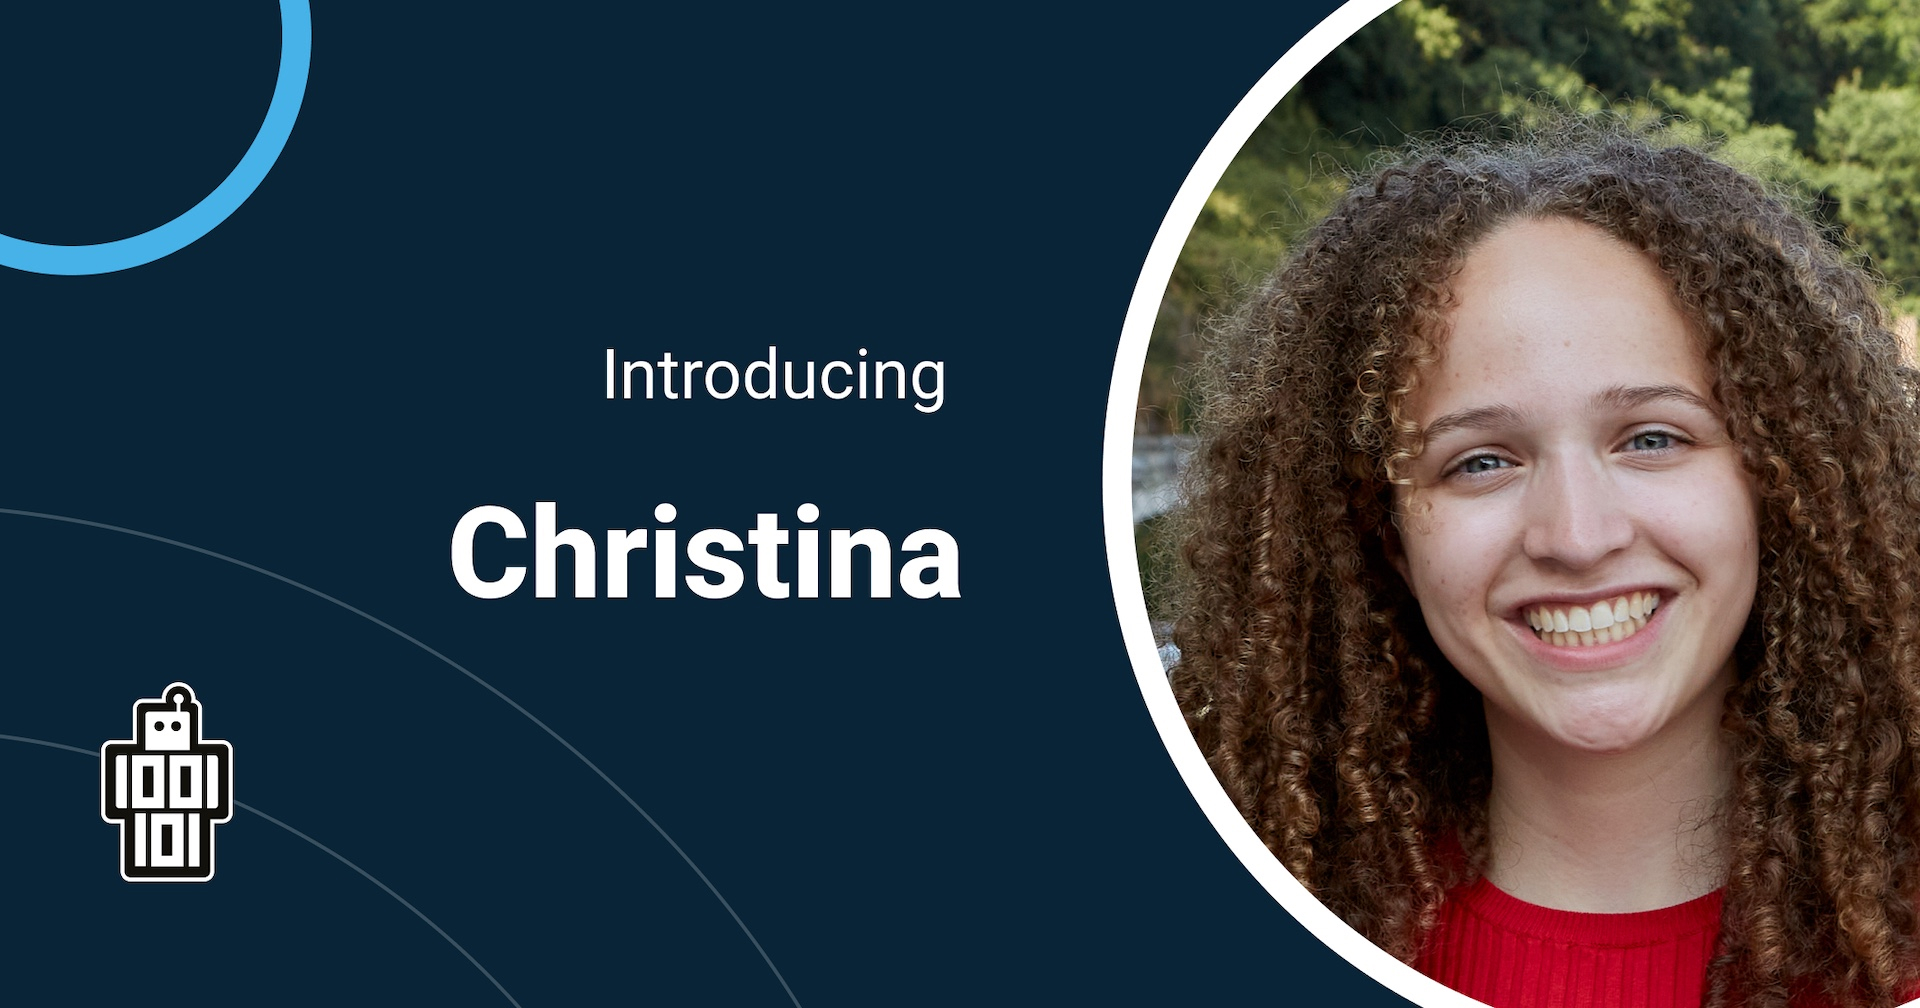 Meet Christina! - We would like to introduce you to our newest team member Christina